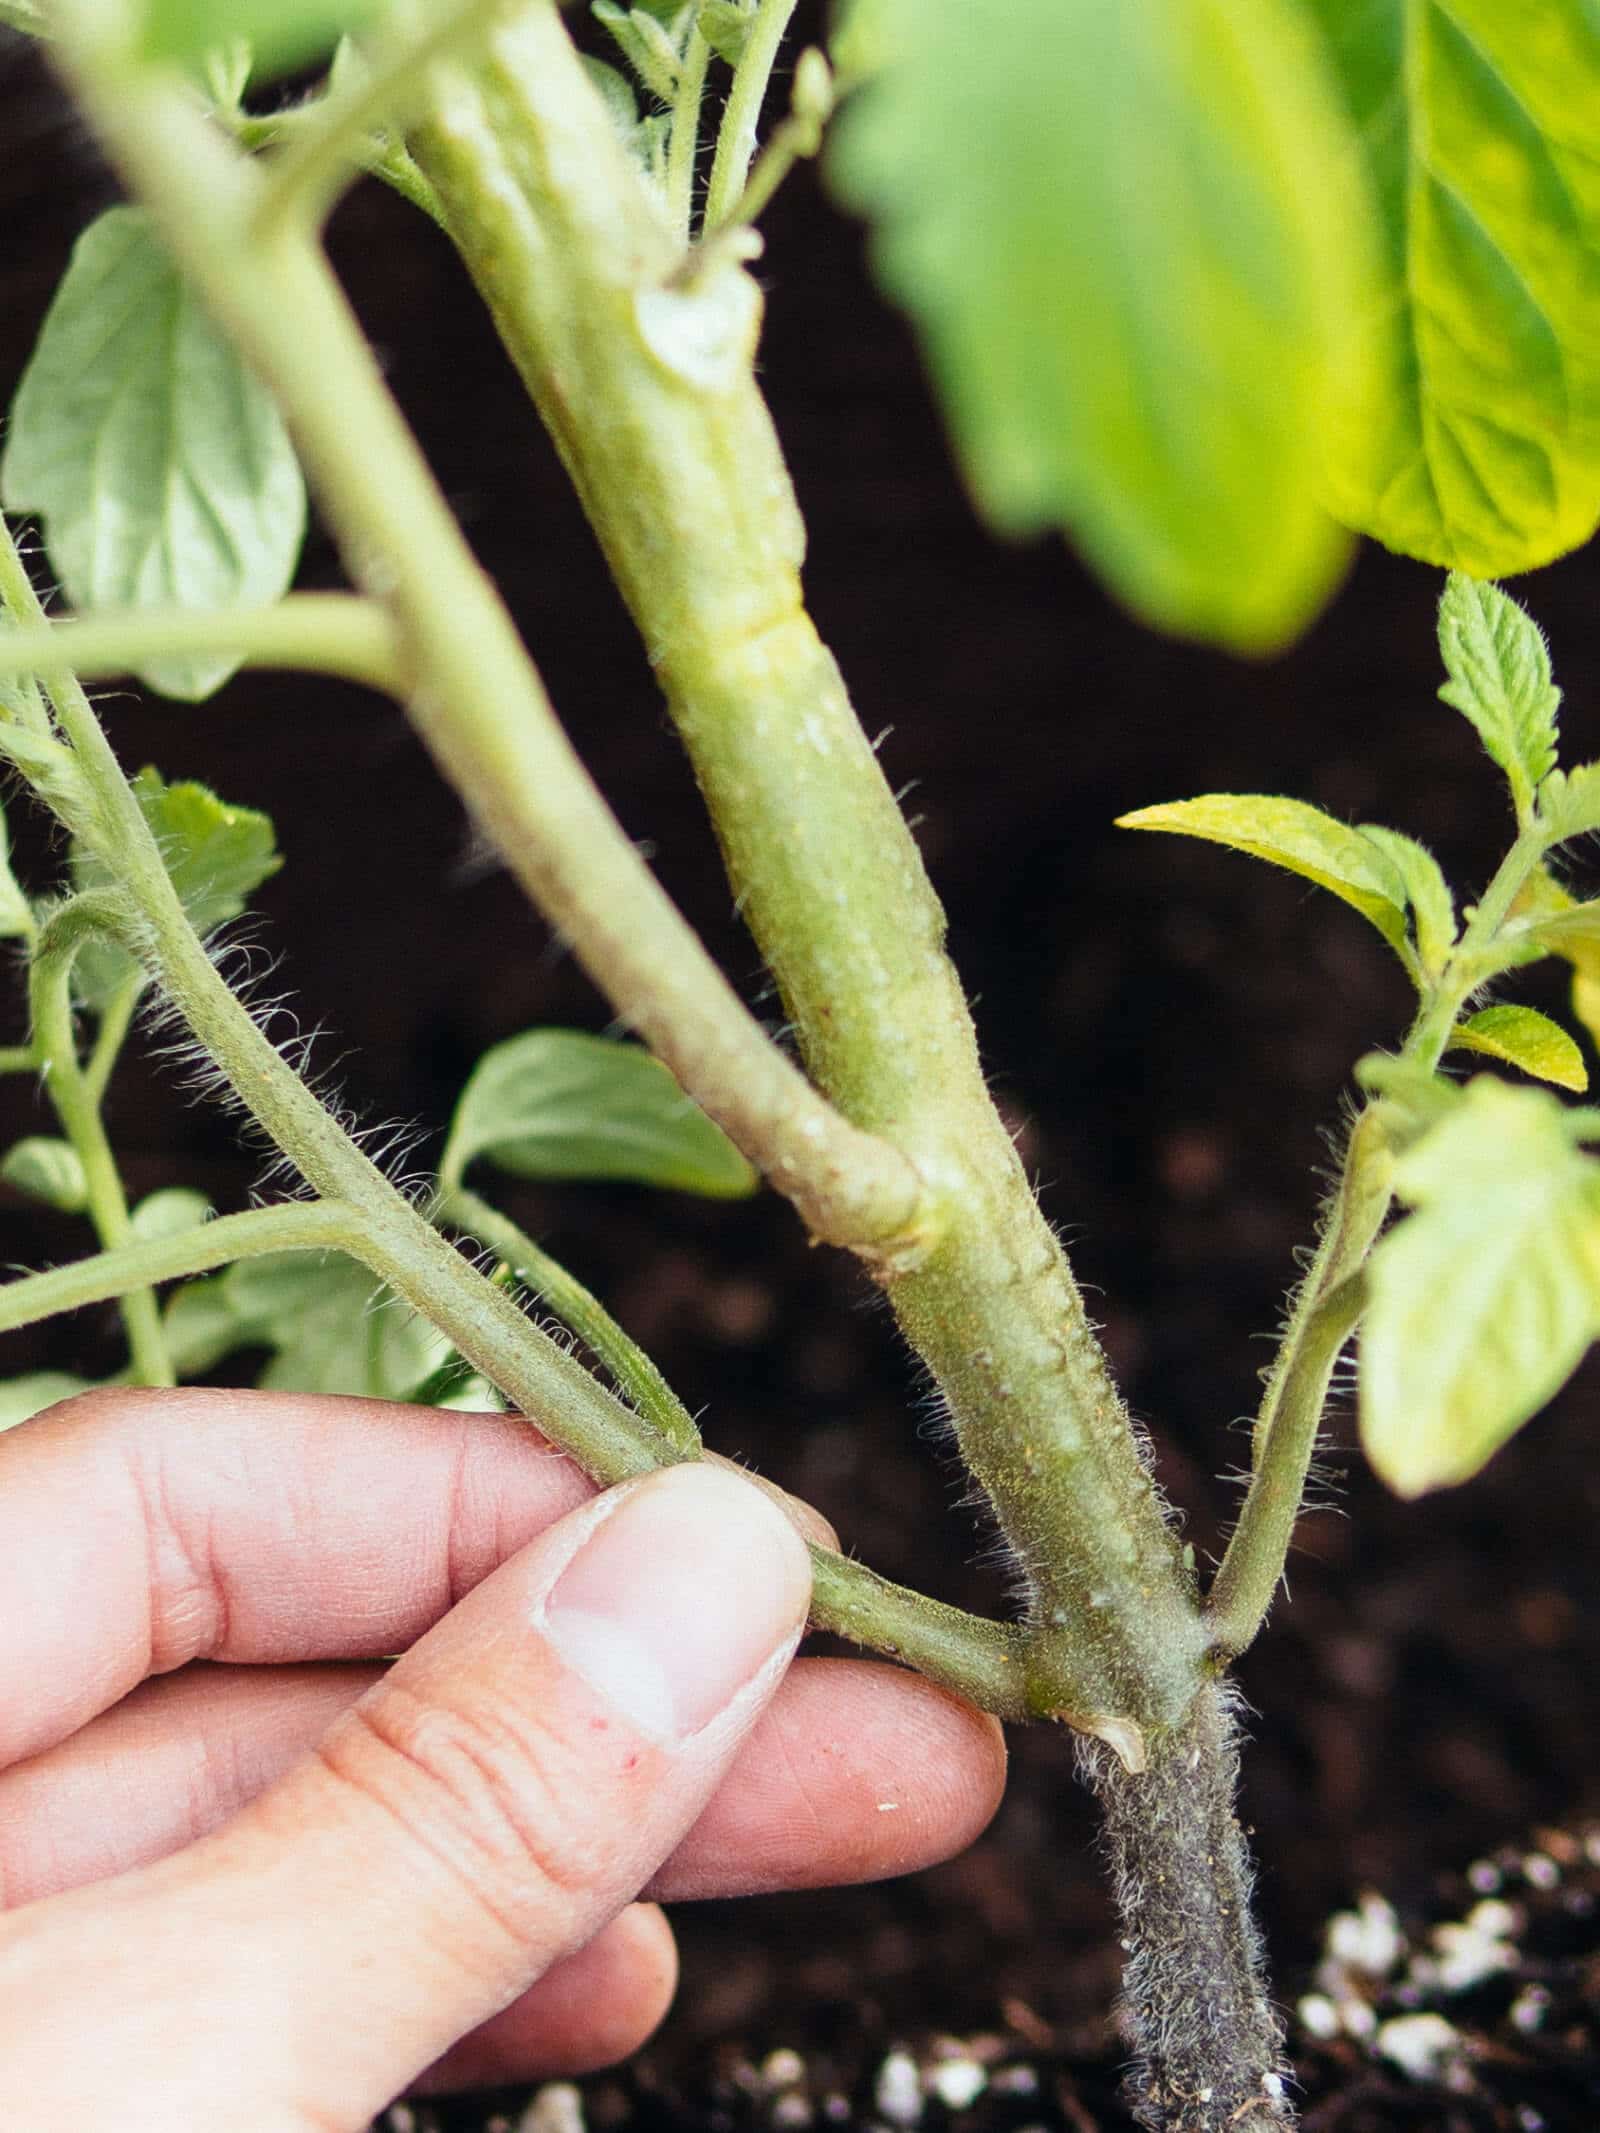 Bury the stems of your tomato plants